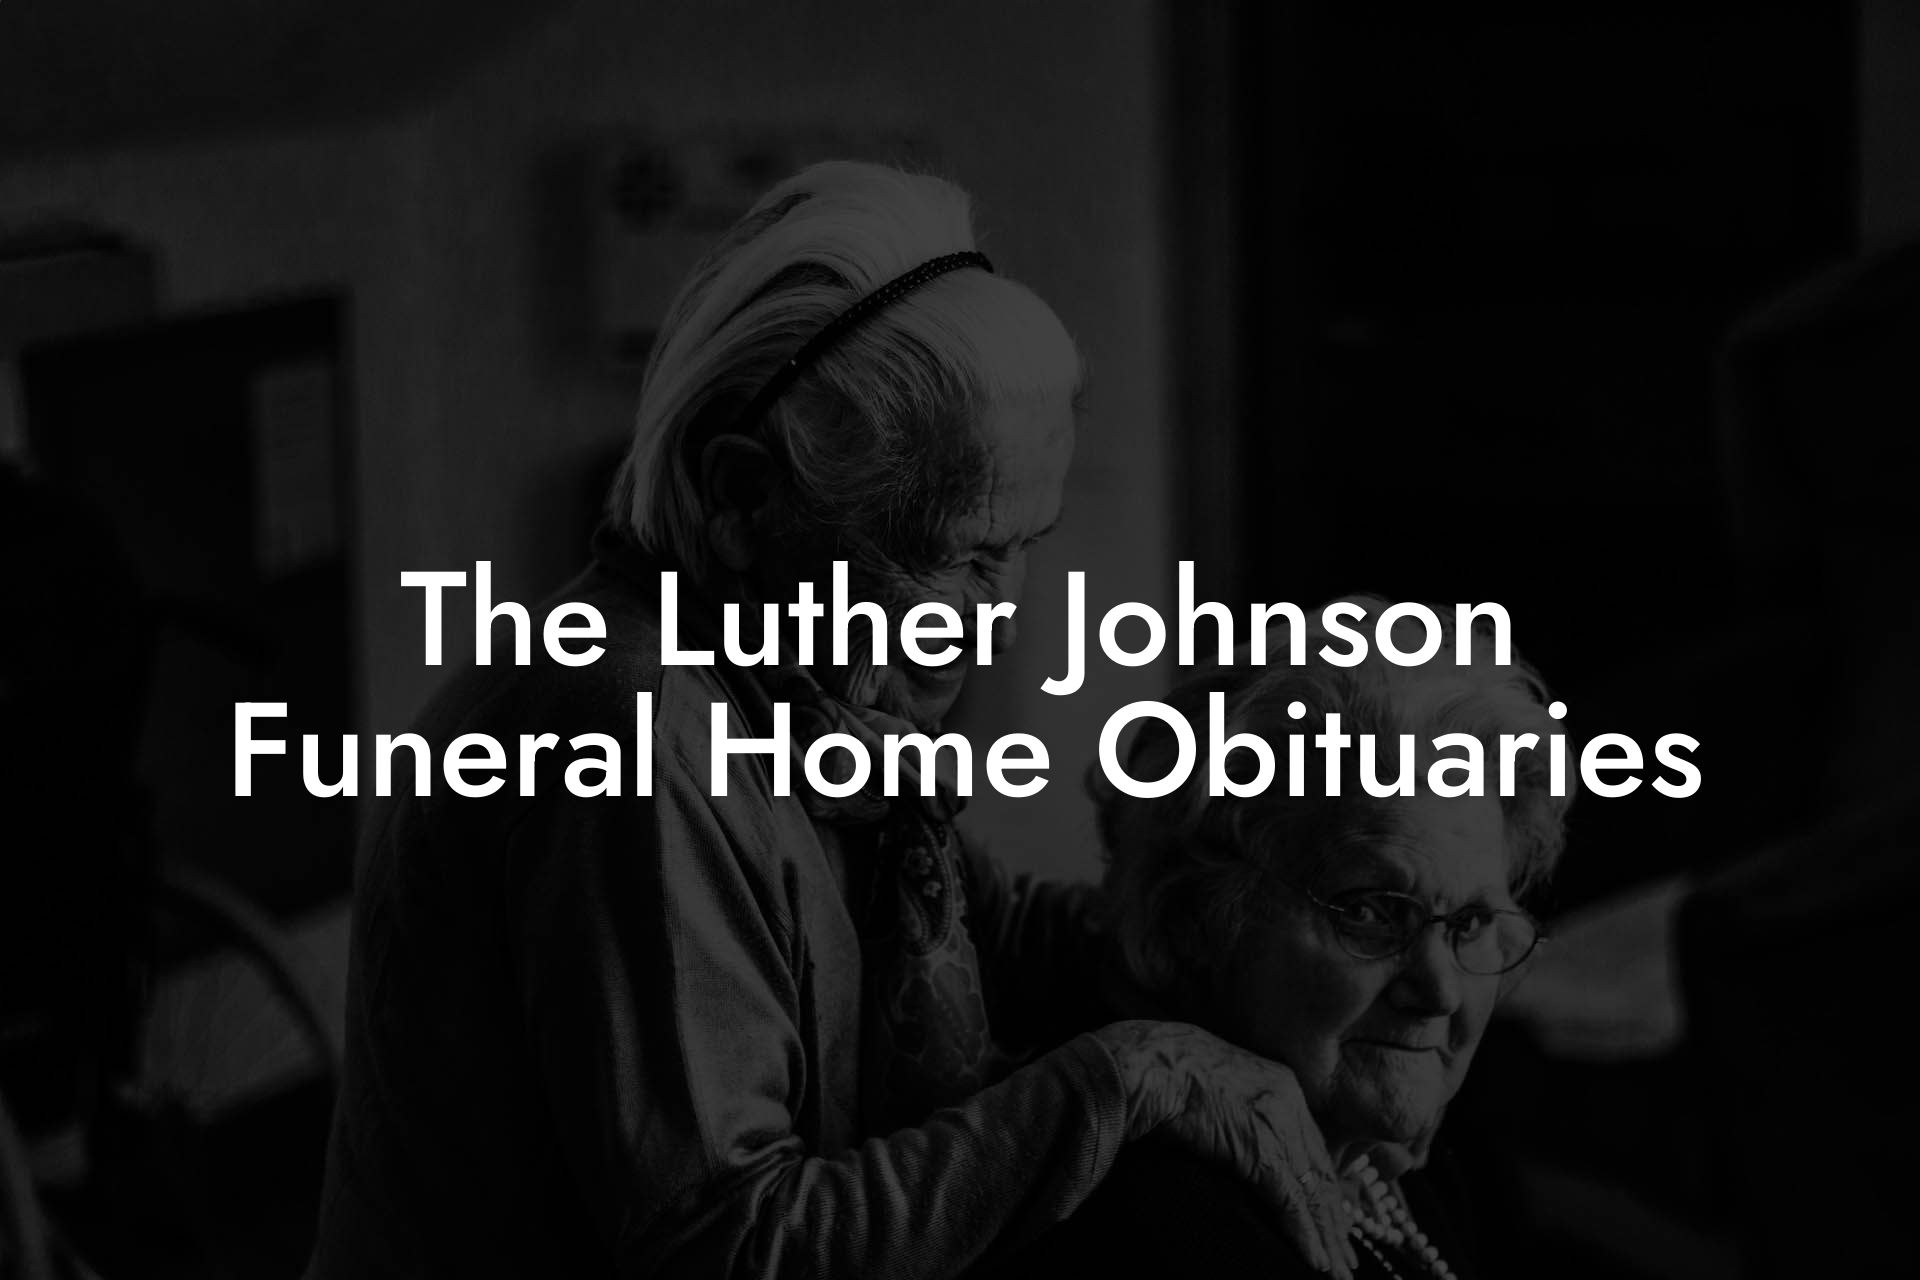 The Luther Johnson Funeral Home Obituaries